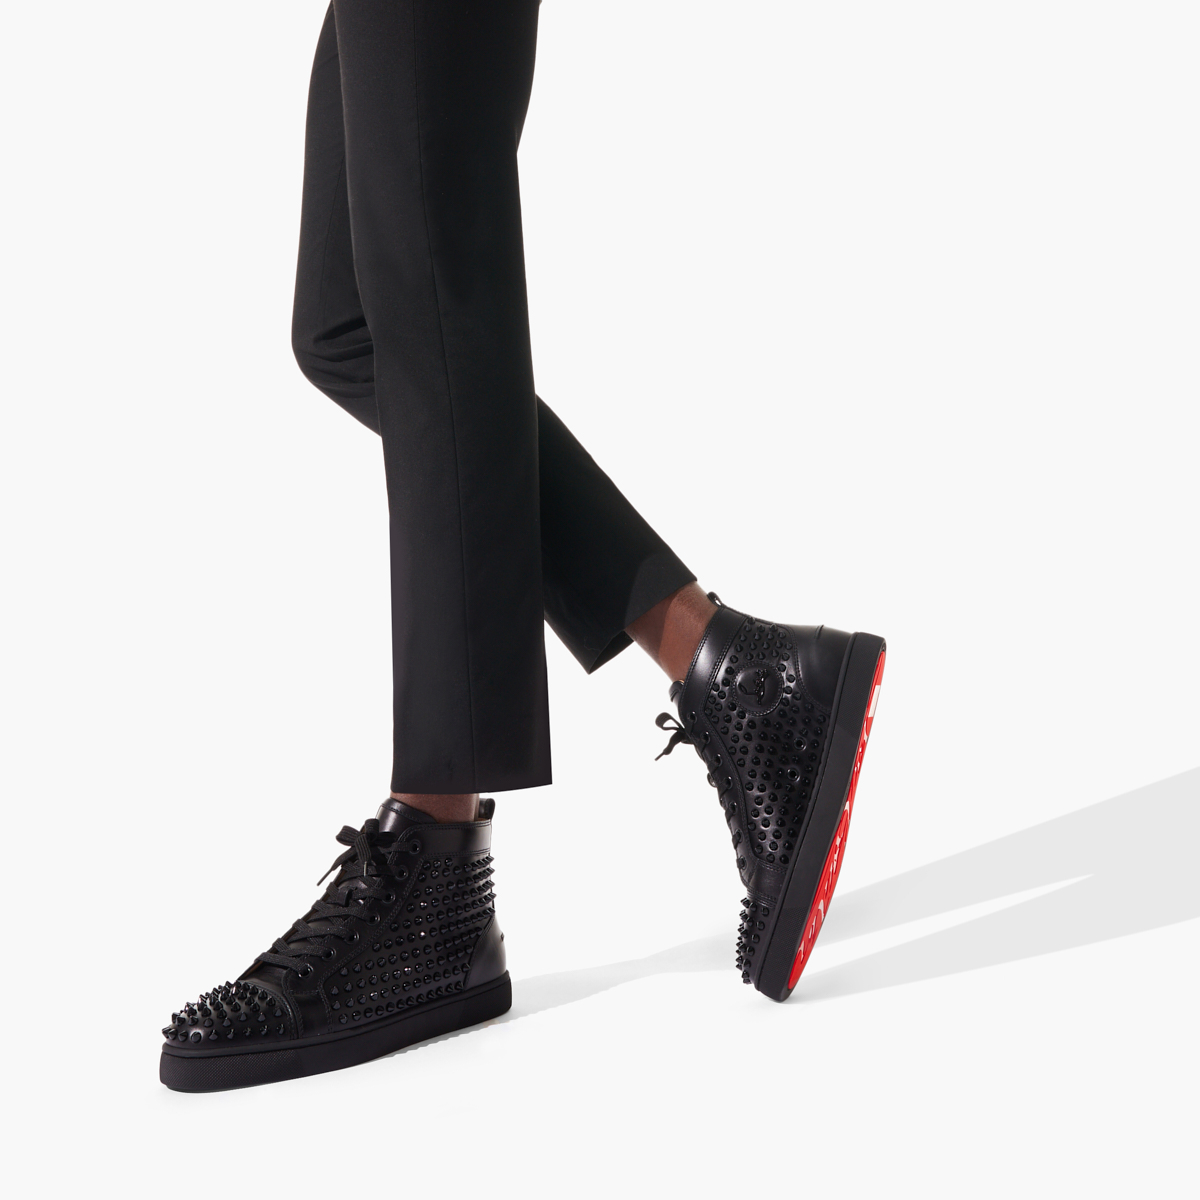 belastning atlet støvle Louis Spikes - Sneakers - Calf leather and spikes - Black - Christian  Louboutin